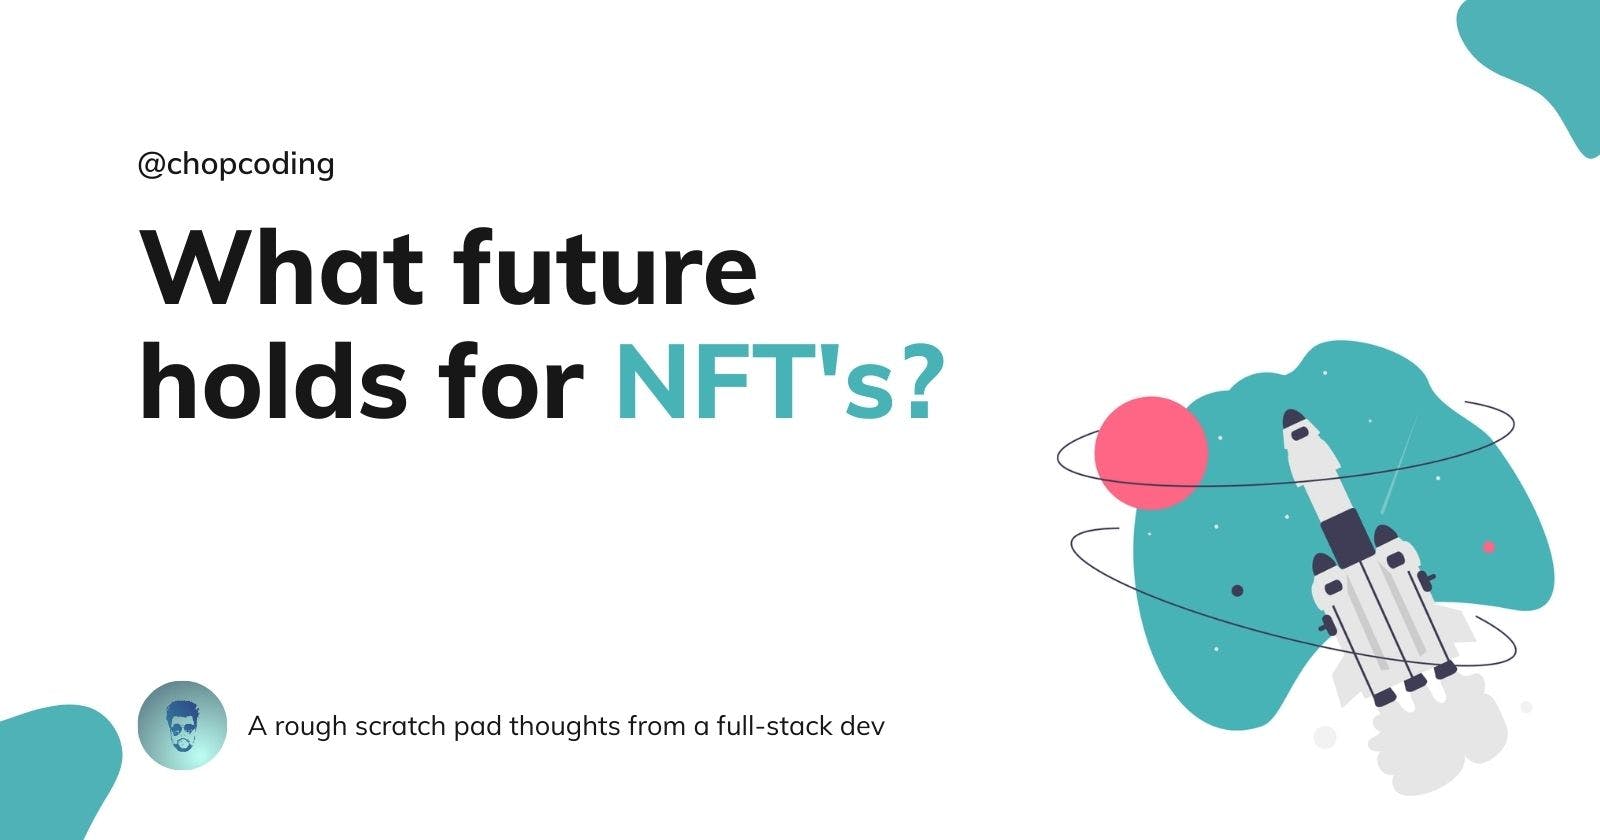 What future holds for NFT's